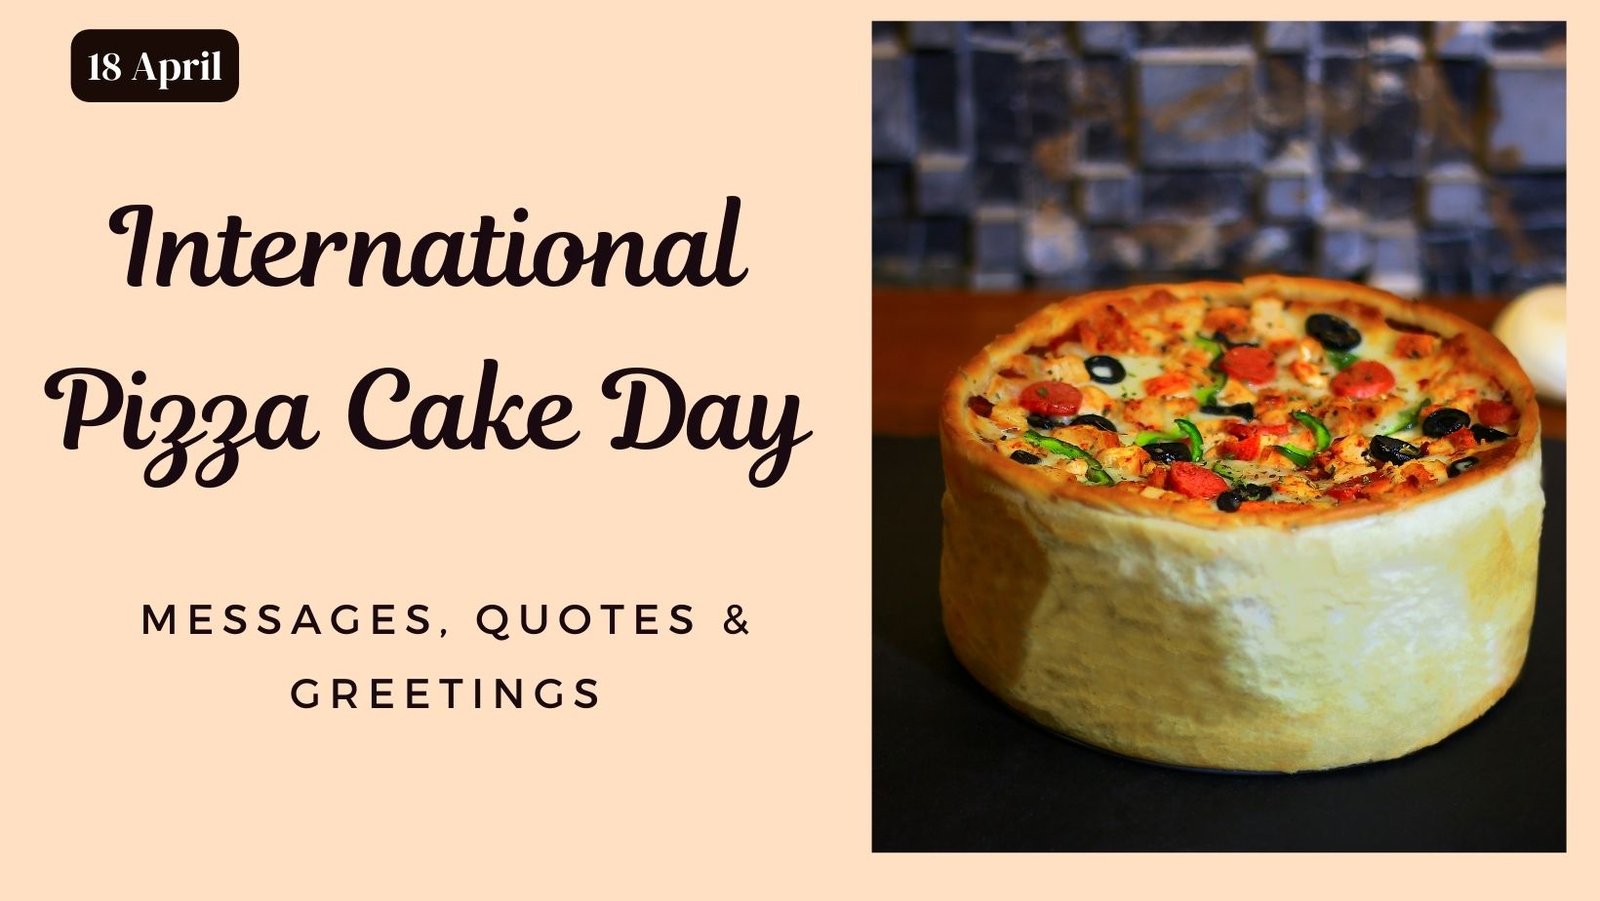 International Pizza Cake Day – April 18: Messages, Quotes & Greetings